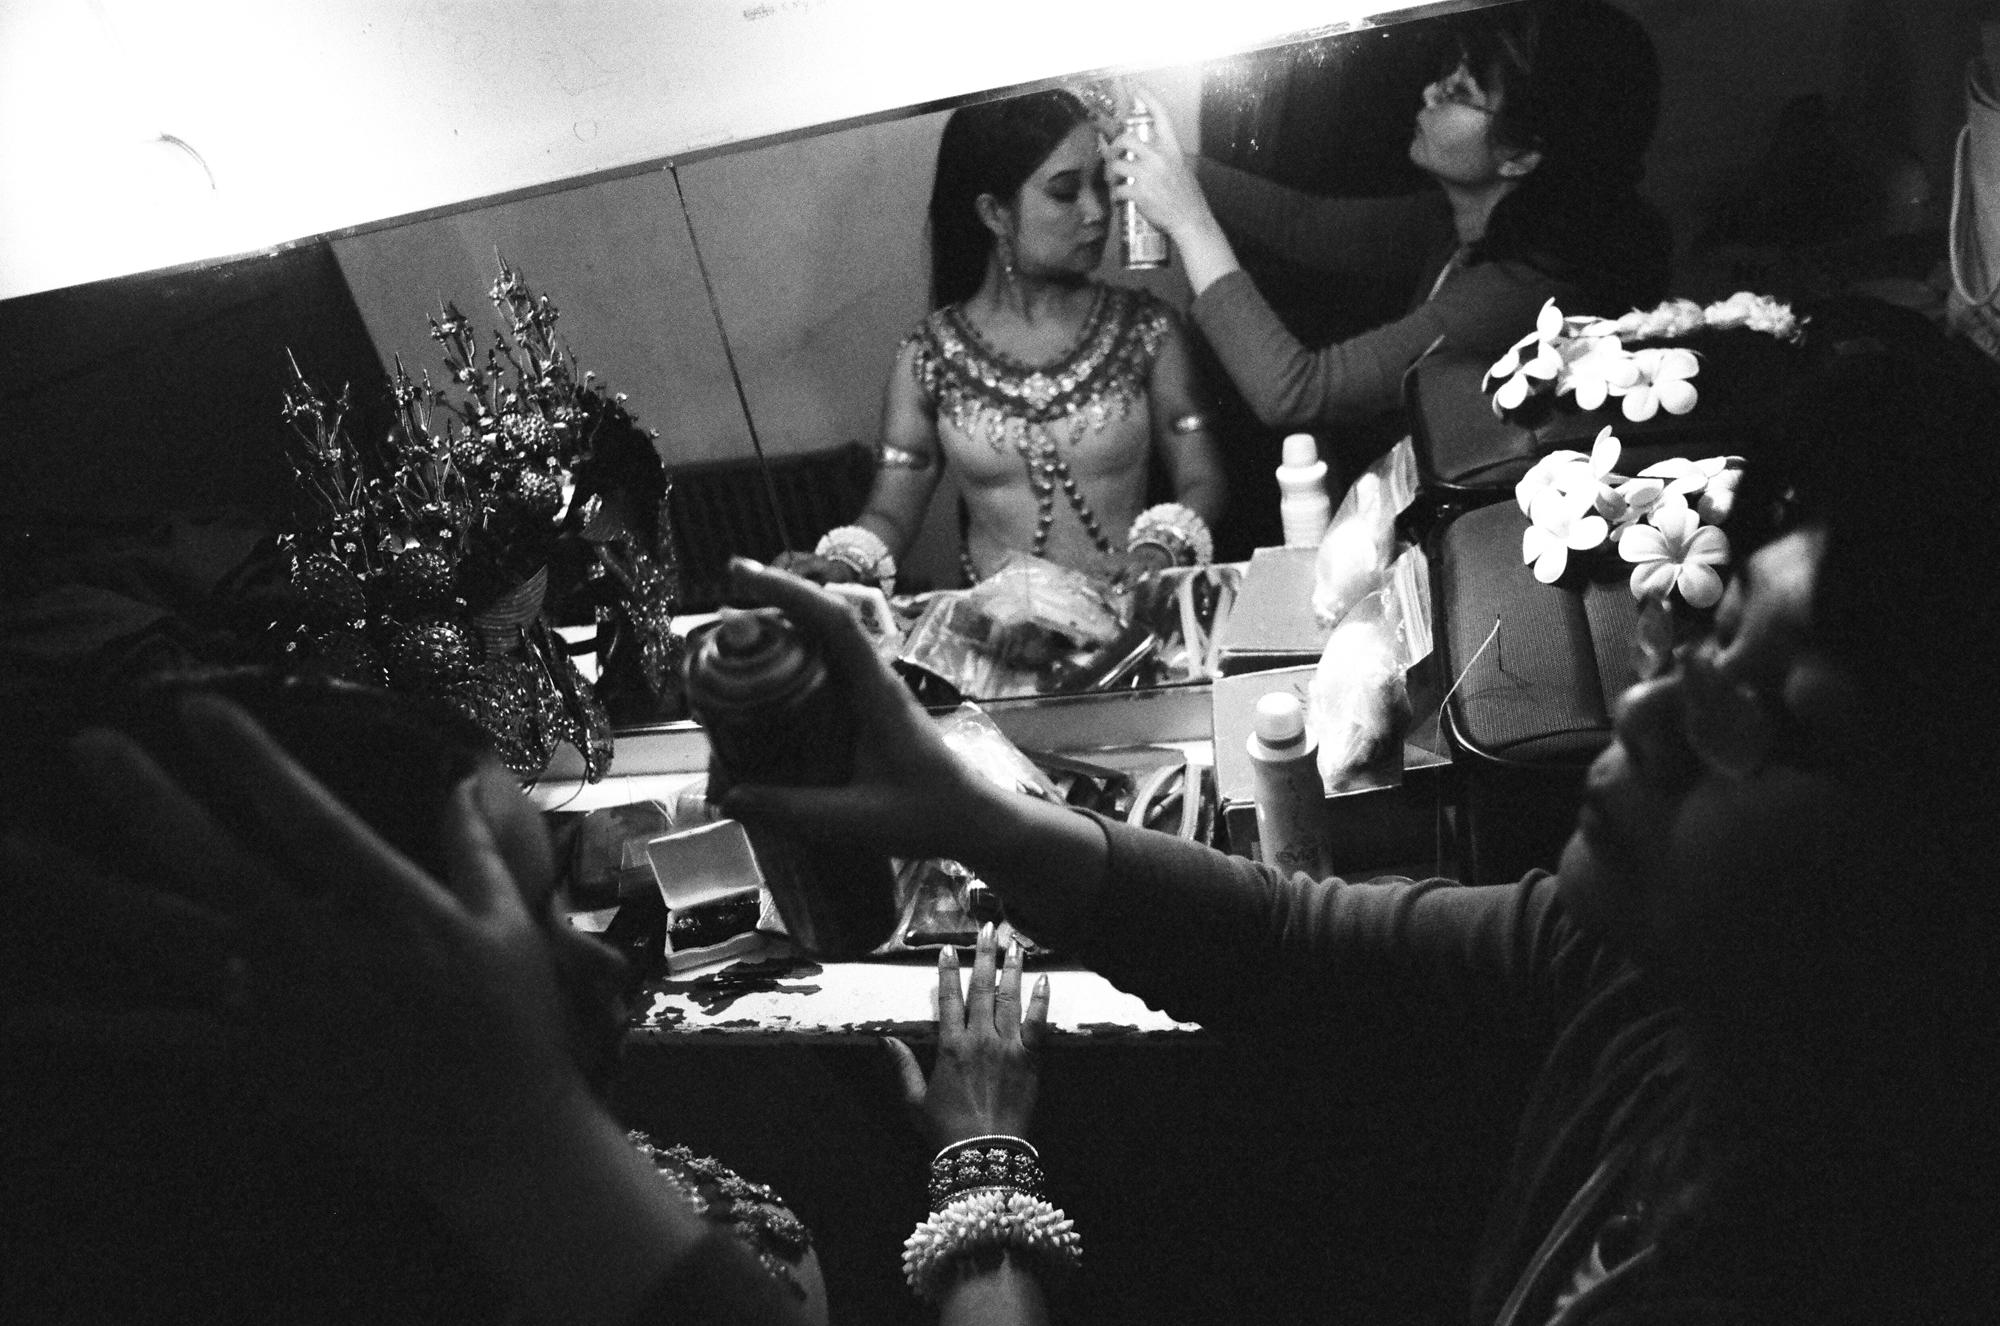 Celebrated Cambodian Dancer Charya Burt in the dressing room. Her sister spends two hours hand sewing her costume on before every one of her performances. As a member of Cambodia&rsquo;s Royal Dance Troupe, Charya toured nationally and internationally. After emigrating in 1993, Charya has been performing throughout the United States, including the Getty Museum in Los Angeles, the Kennedy Center in Washington DC, the San Francisco Opera House and countless times as a featured dancer at the San Francisco Ethnic Dance Festival. Her original works have been presented by the Jacob&rsquo;s Pillow Dance Festival, World Arts West, CounterPULSE, UC Santa Barbara, San Francisco Asian Art Museum, Oregon Shakespeare Festival, and many others. Charya holds a B.A., Cum Laude, from Sonoma State University and has conducted dance workshops at schools and colleges around the country. Charya is also a recipient of the Isadora Duncan Award for Individual Performance.